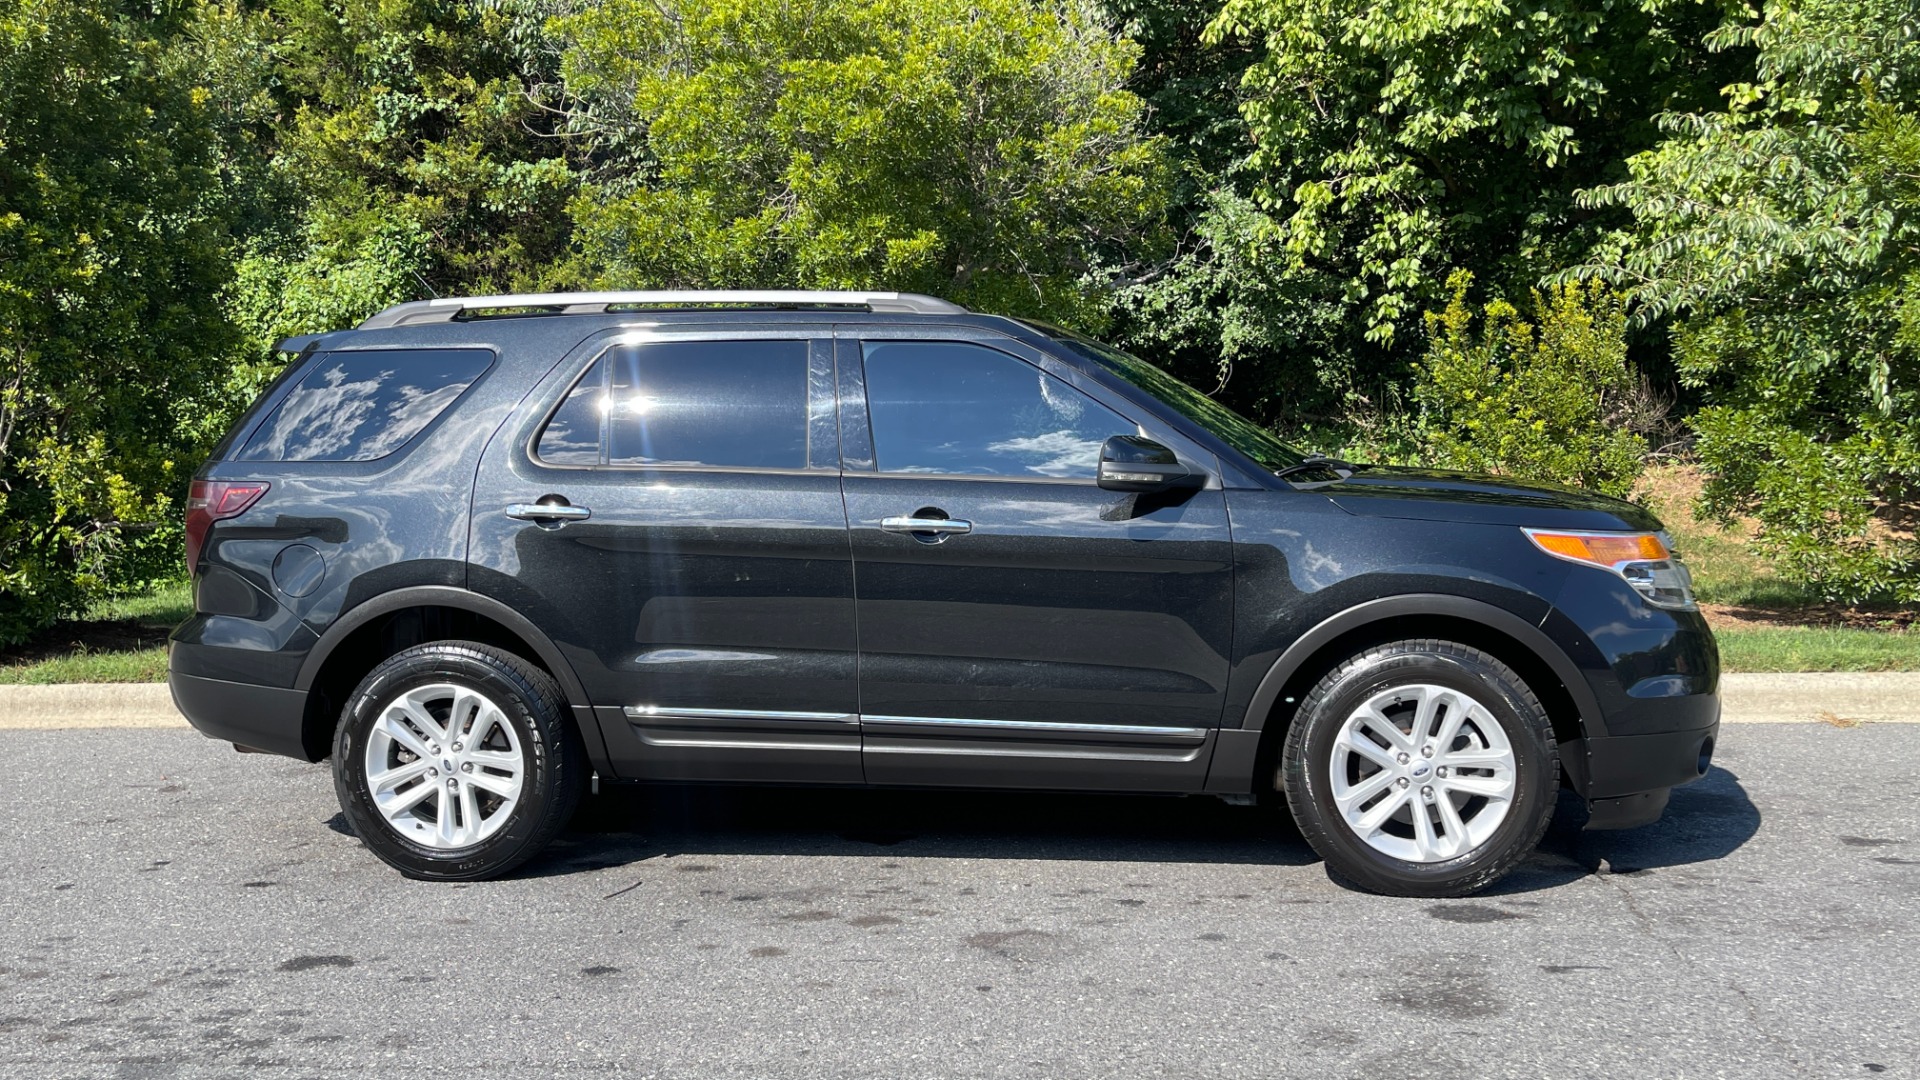 Used 2013 Ford Explorer XLT / LEATHER / COMFORT PACKAGE / 3.5 V6 / REAR VIEW CAMERA / DRIVER CONNEC for sale $13,995 at Formula Imports in Charlotte NC 28227 4